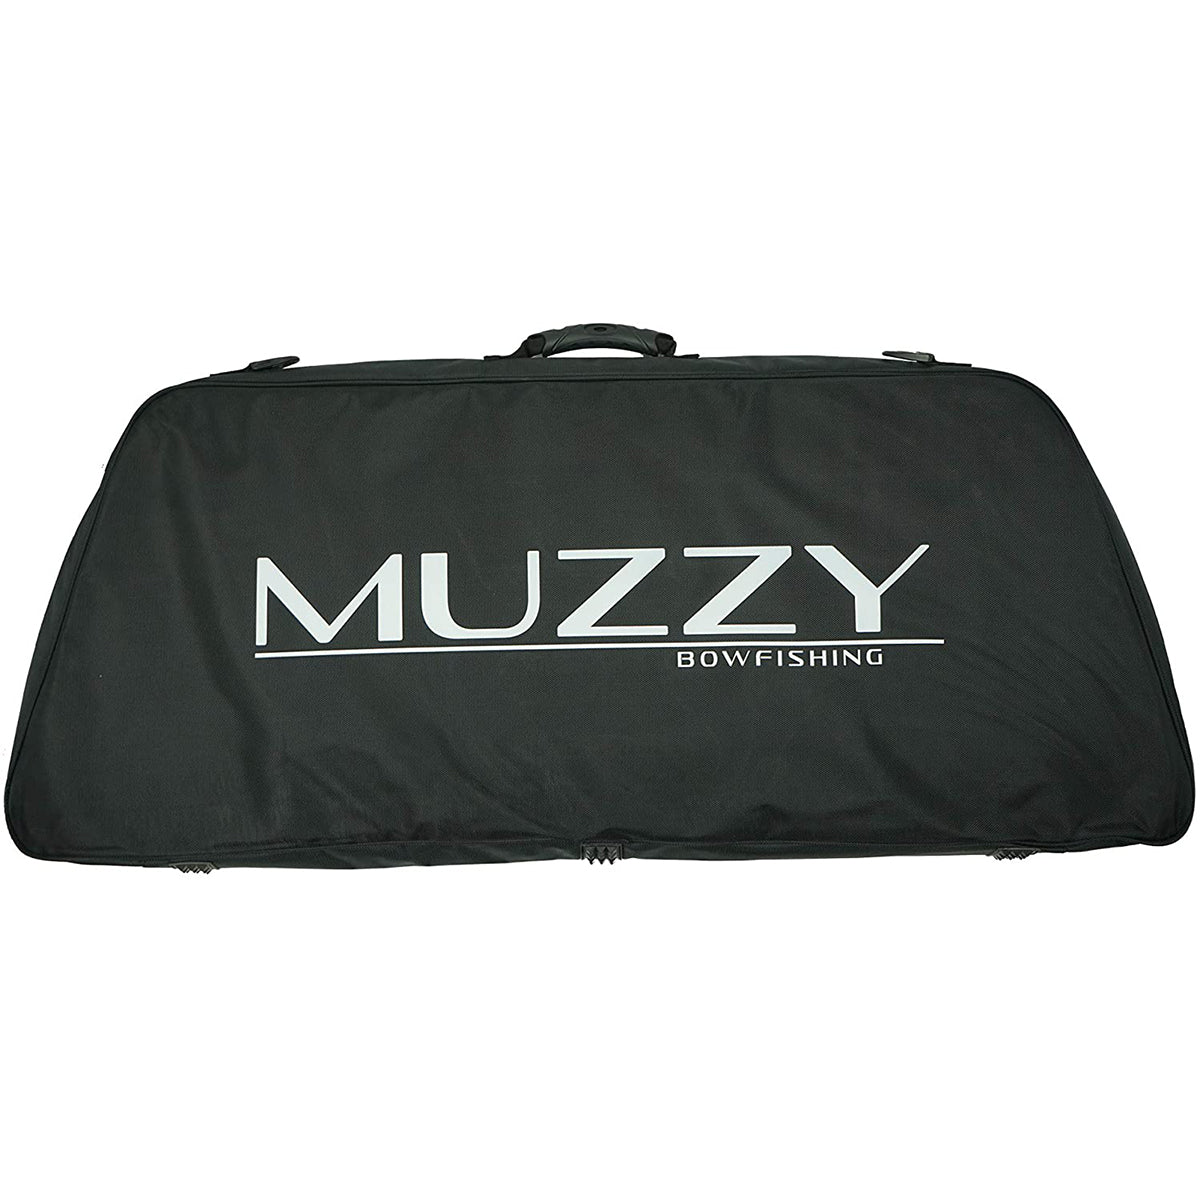 Muzzy Bowfishing Soft-Sided Bow Carrying Case Muzzy